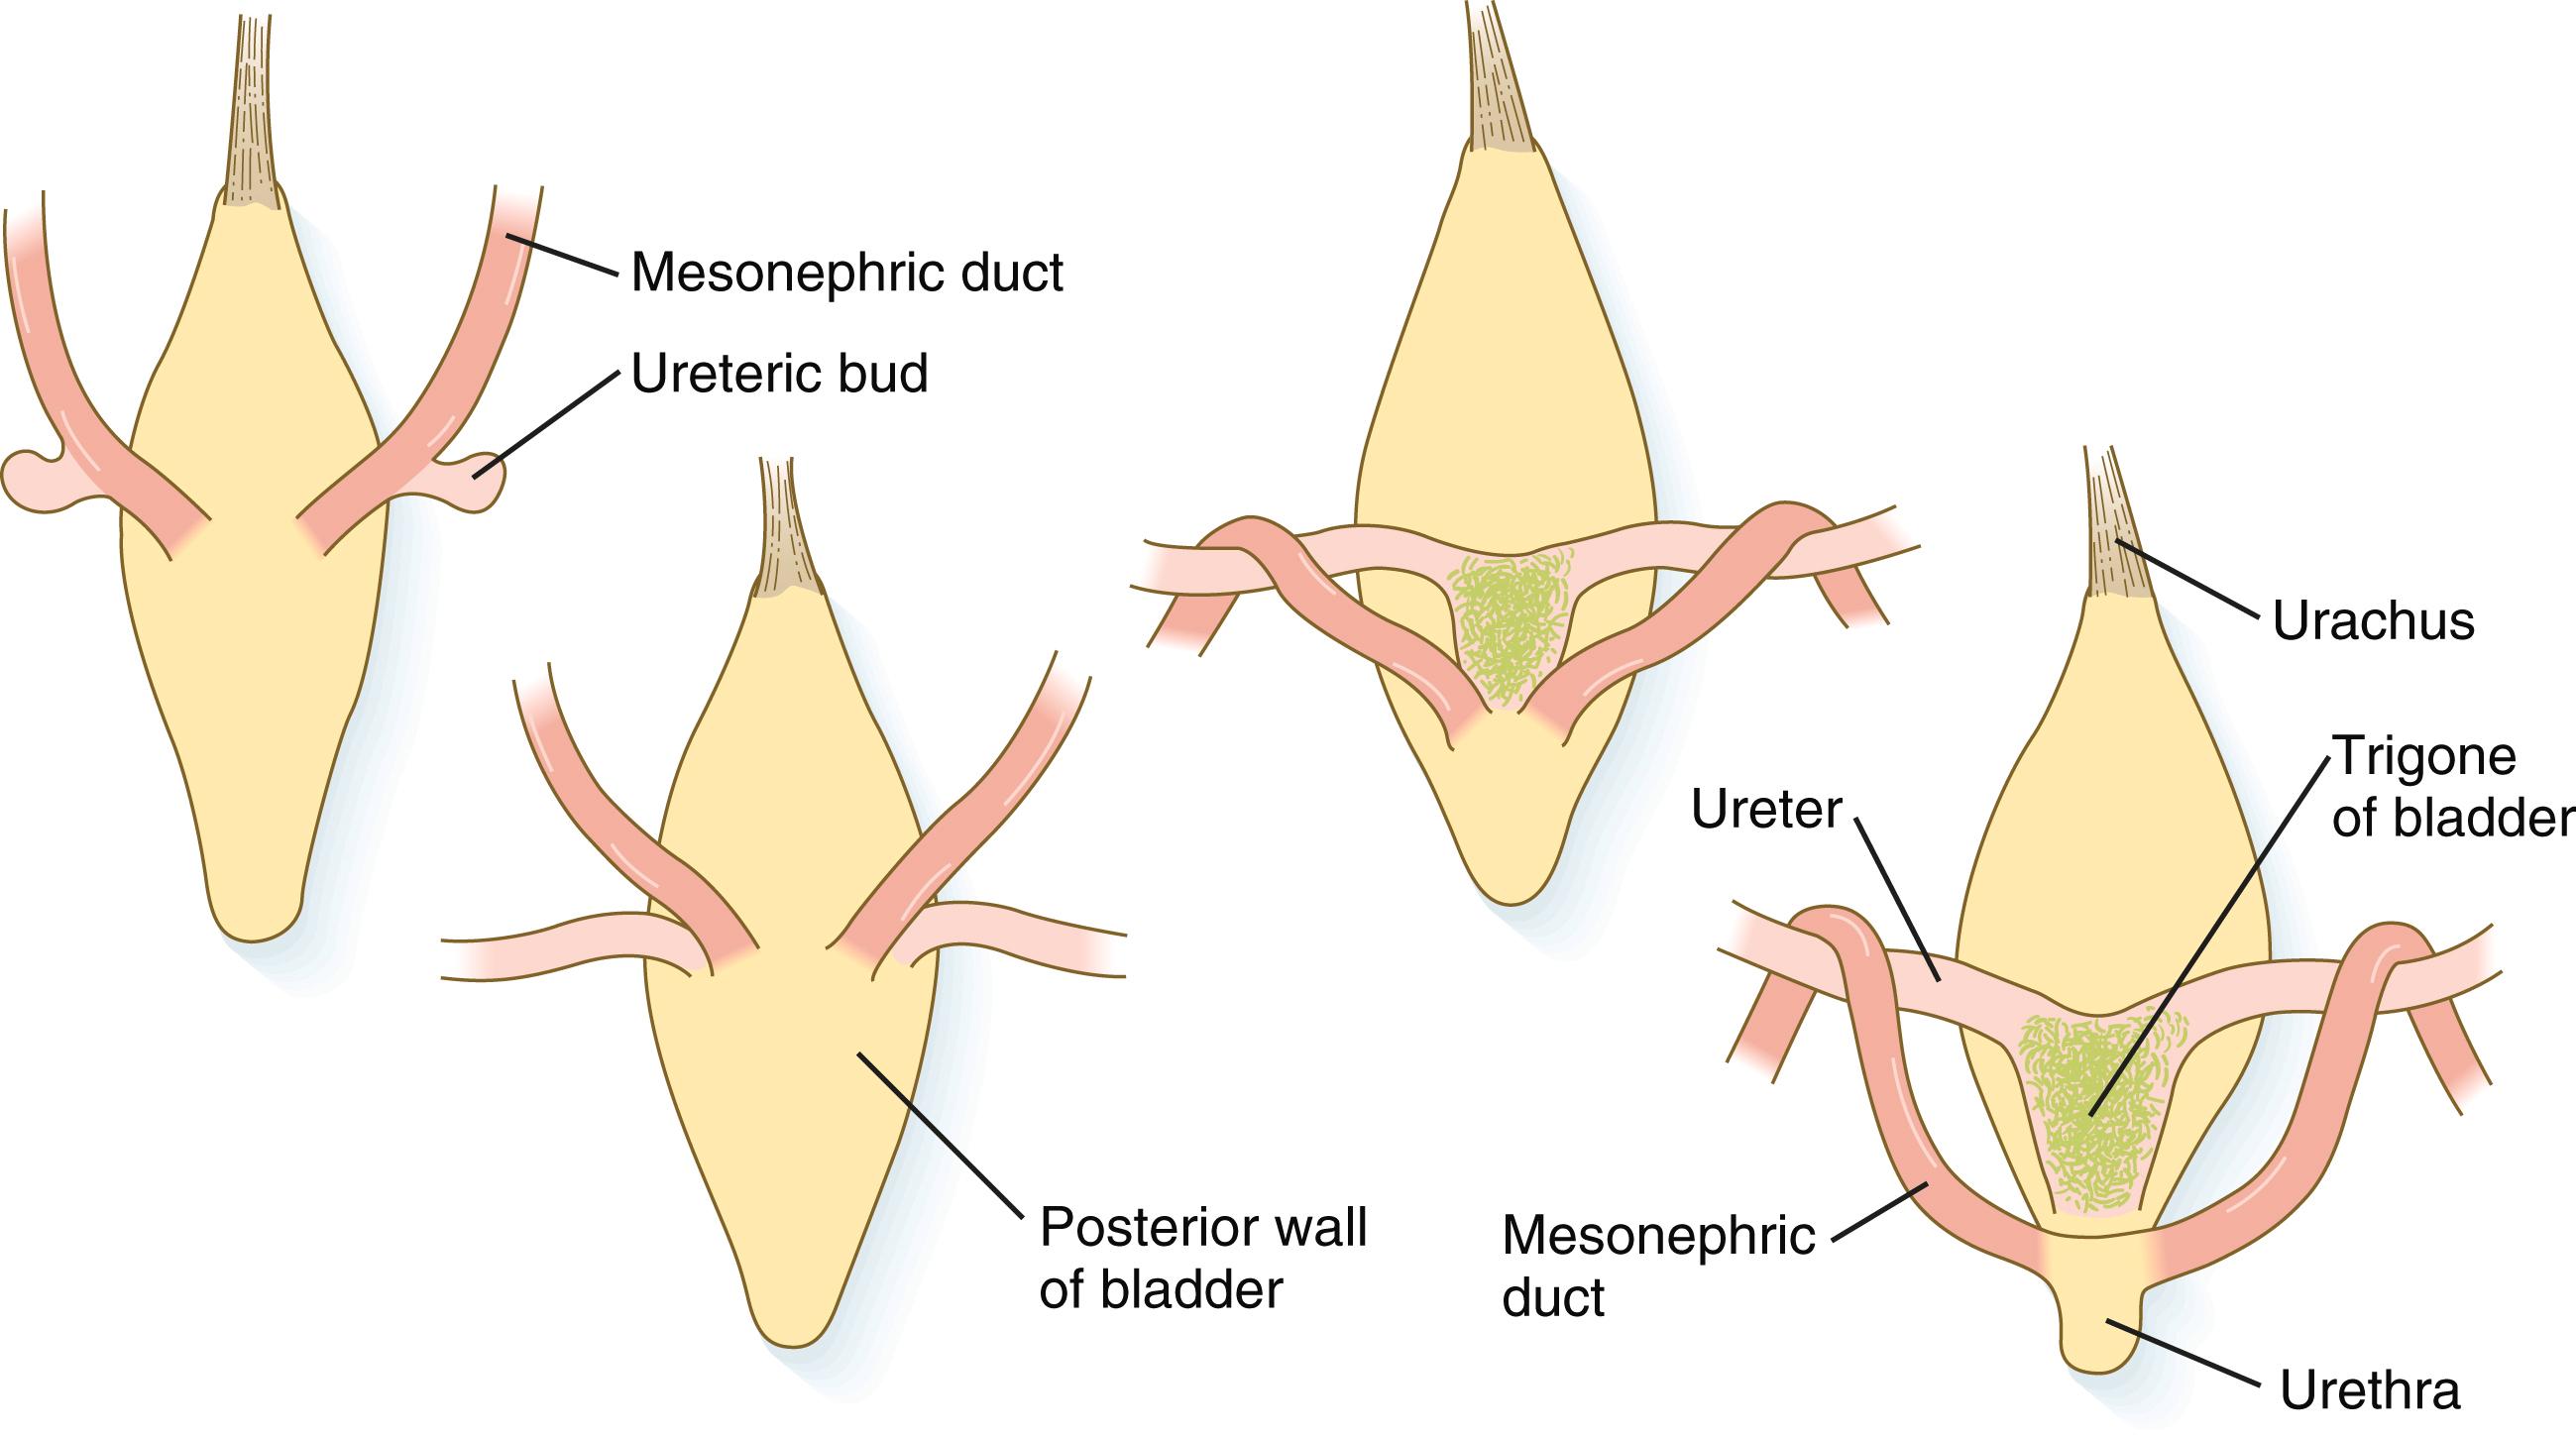 Fig. 16.12, Dorsal views of the developing urinary bladder showing changing relationships of the mesonephric ducts and the ureters as they approach and become incorporated into the bladder.